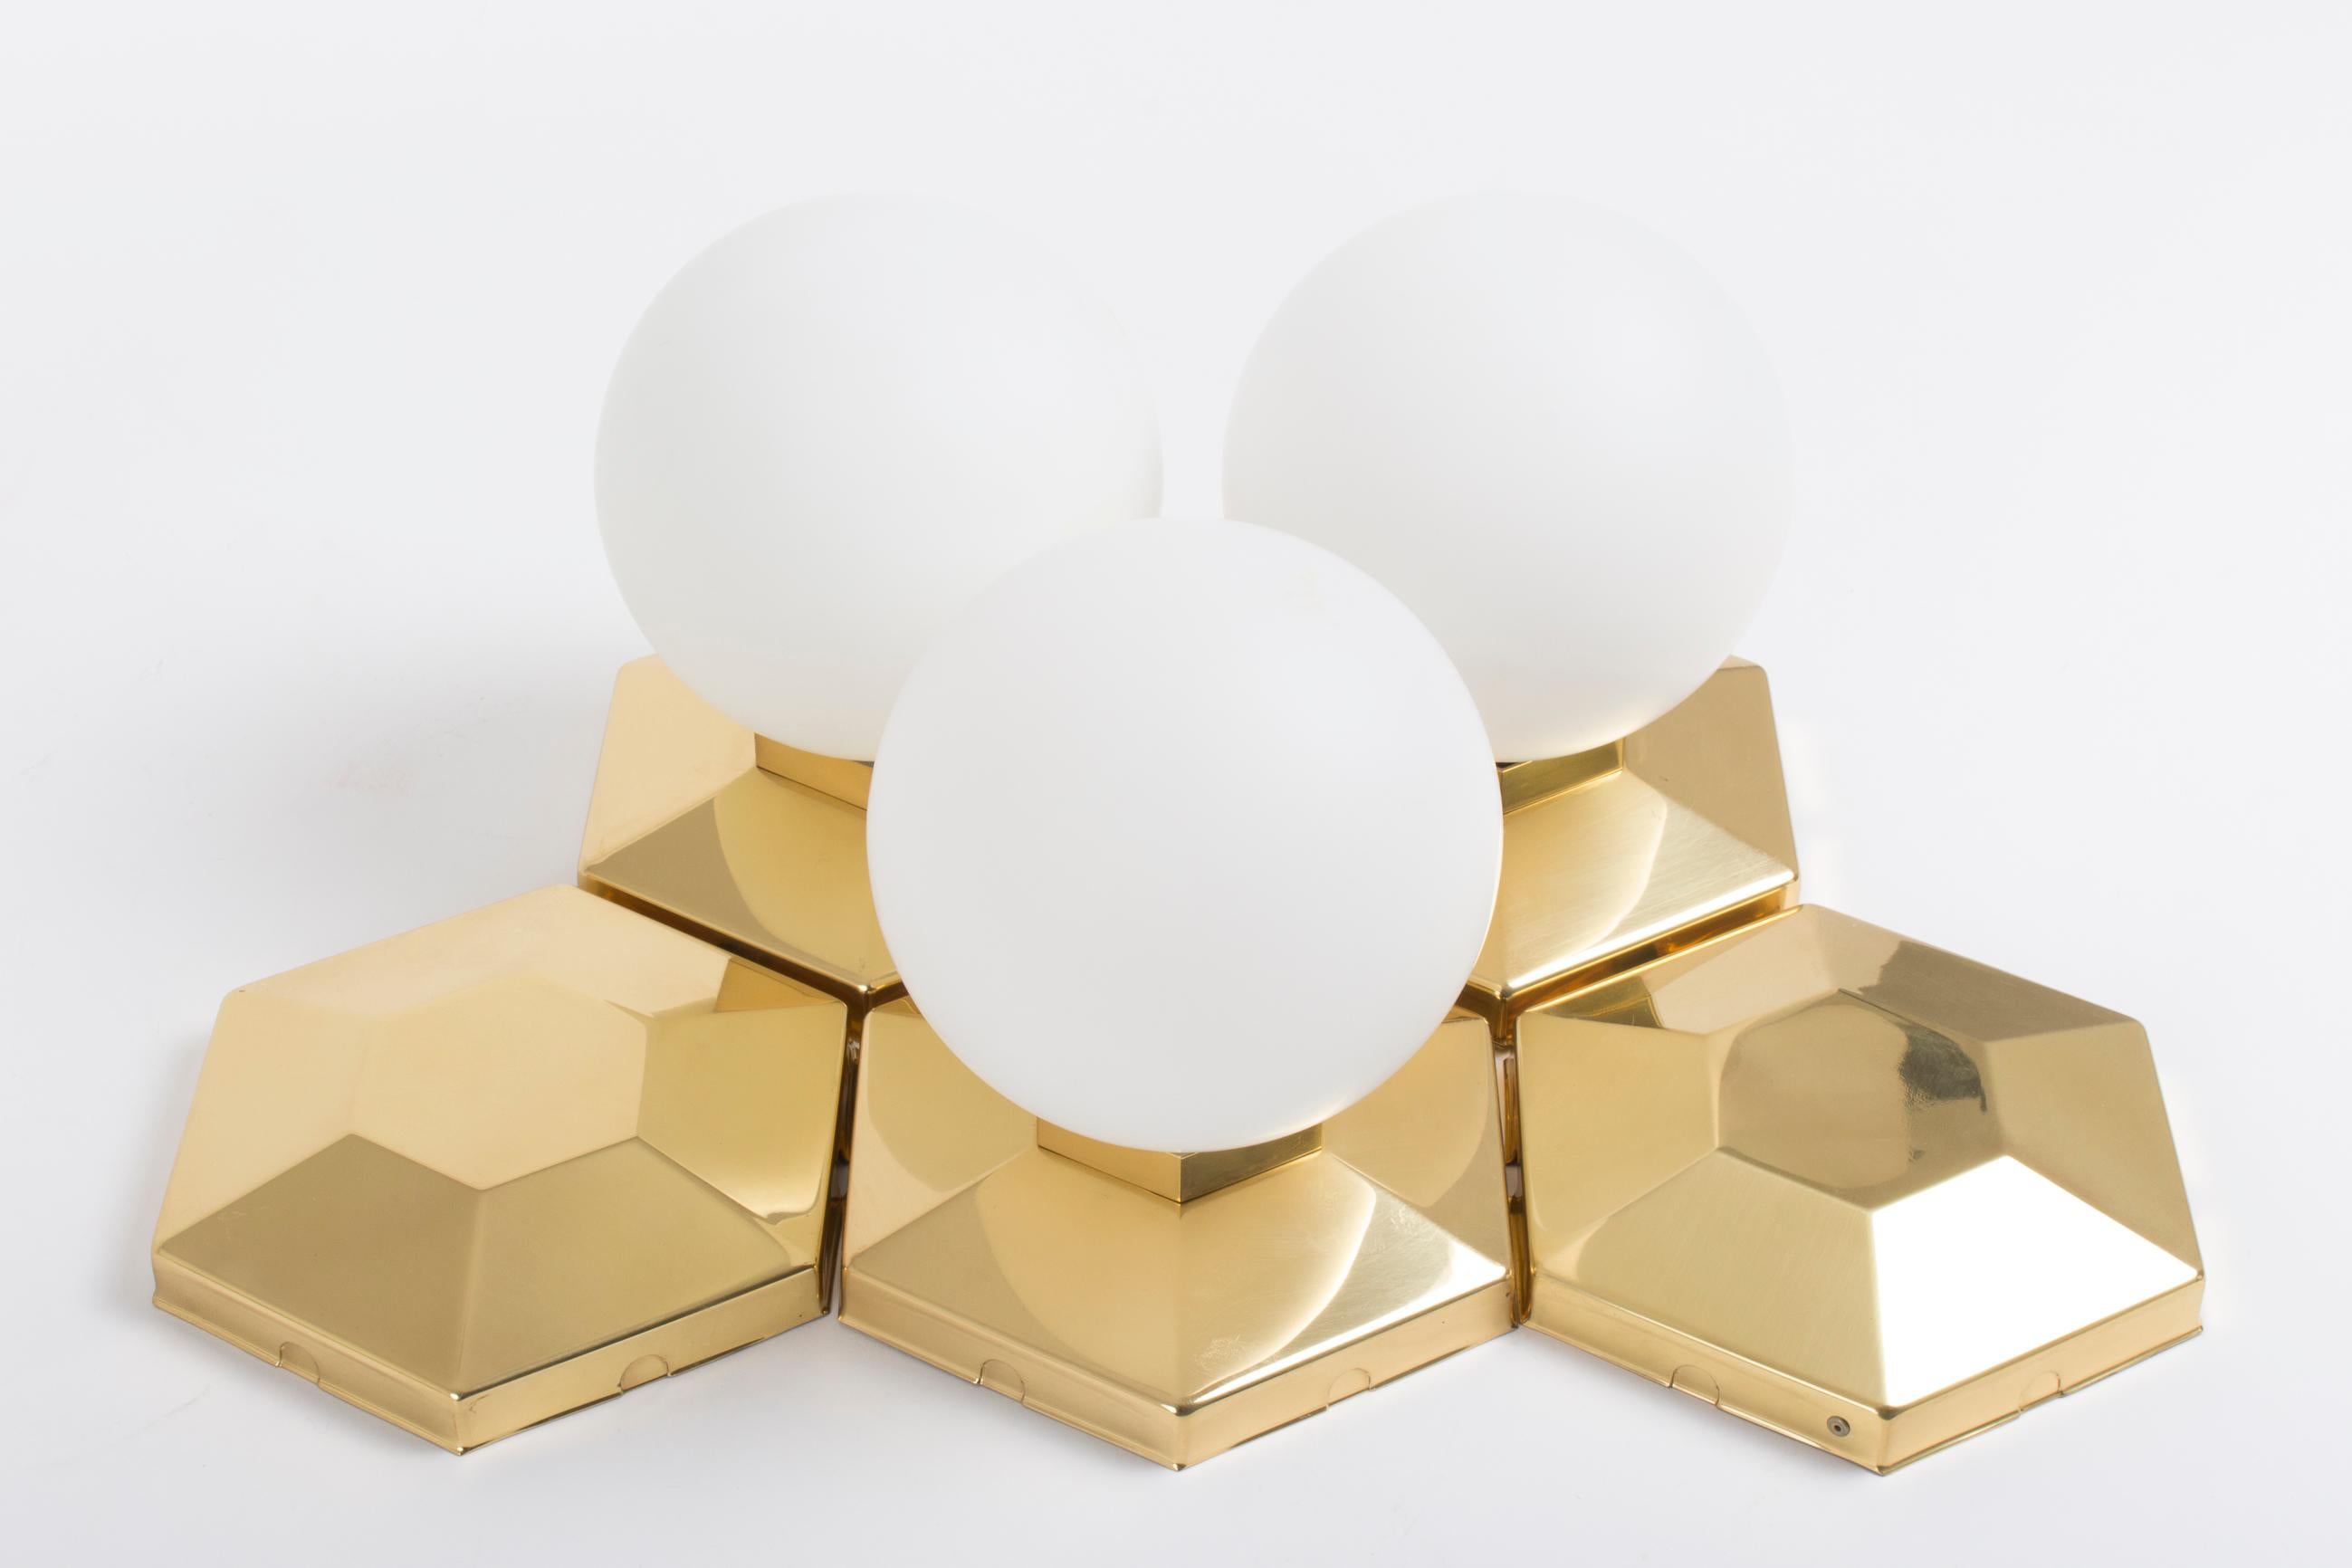 Set of multiple brass and glass flush mounts for modular installation, priced per piece (blank or opal glass-sphere) from 1970's- Design by Rolf Krüger for Neuhaus.

They will also work as wall mounted lights.

We have 40 pieces with opal glass